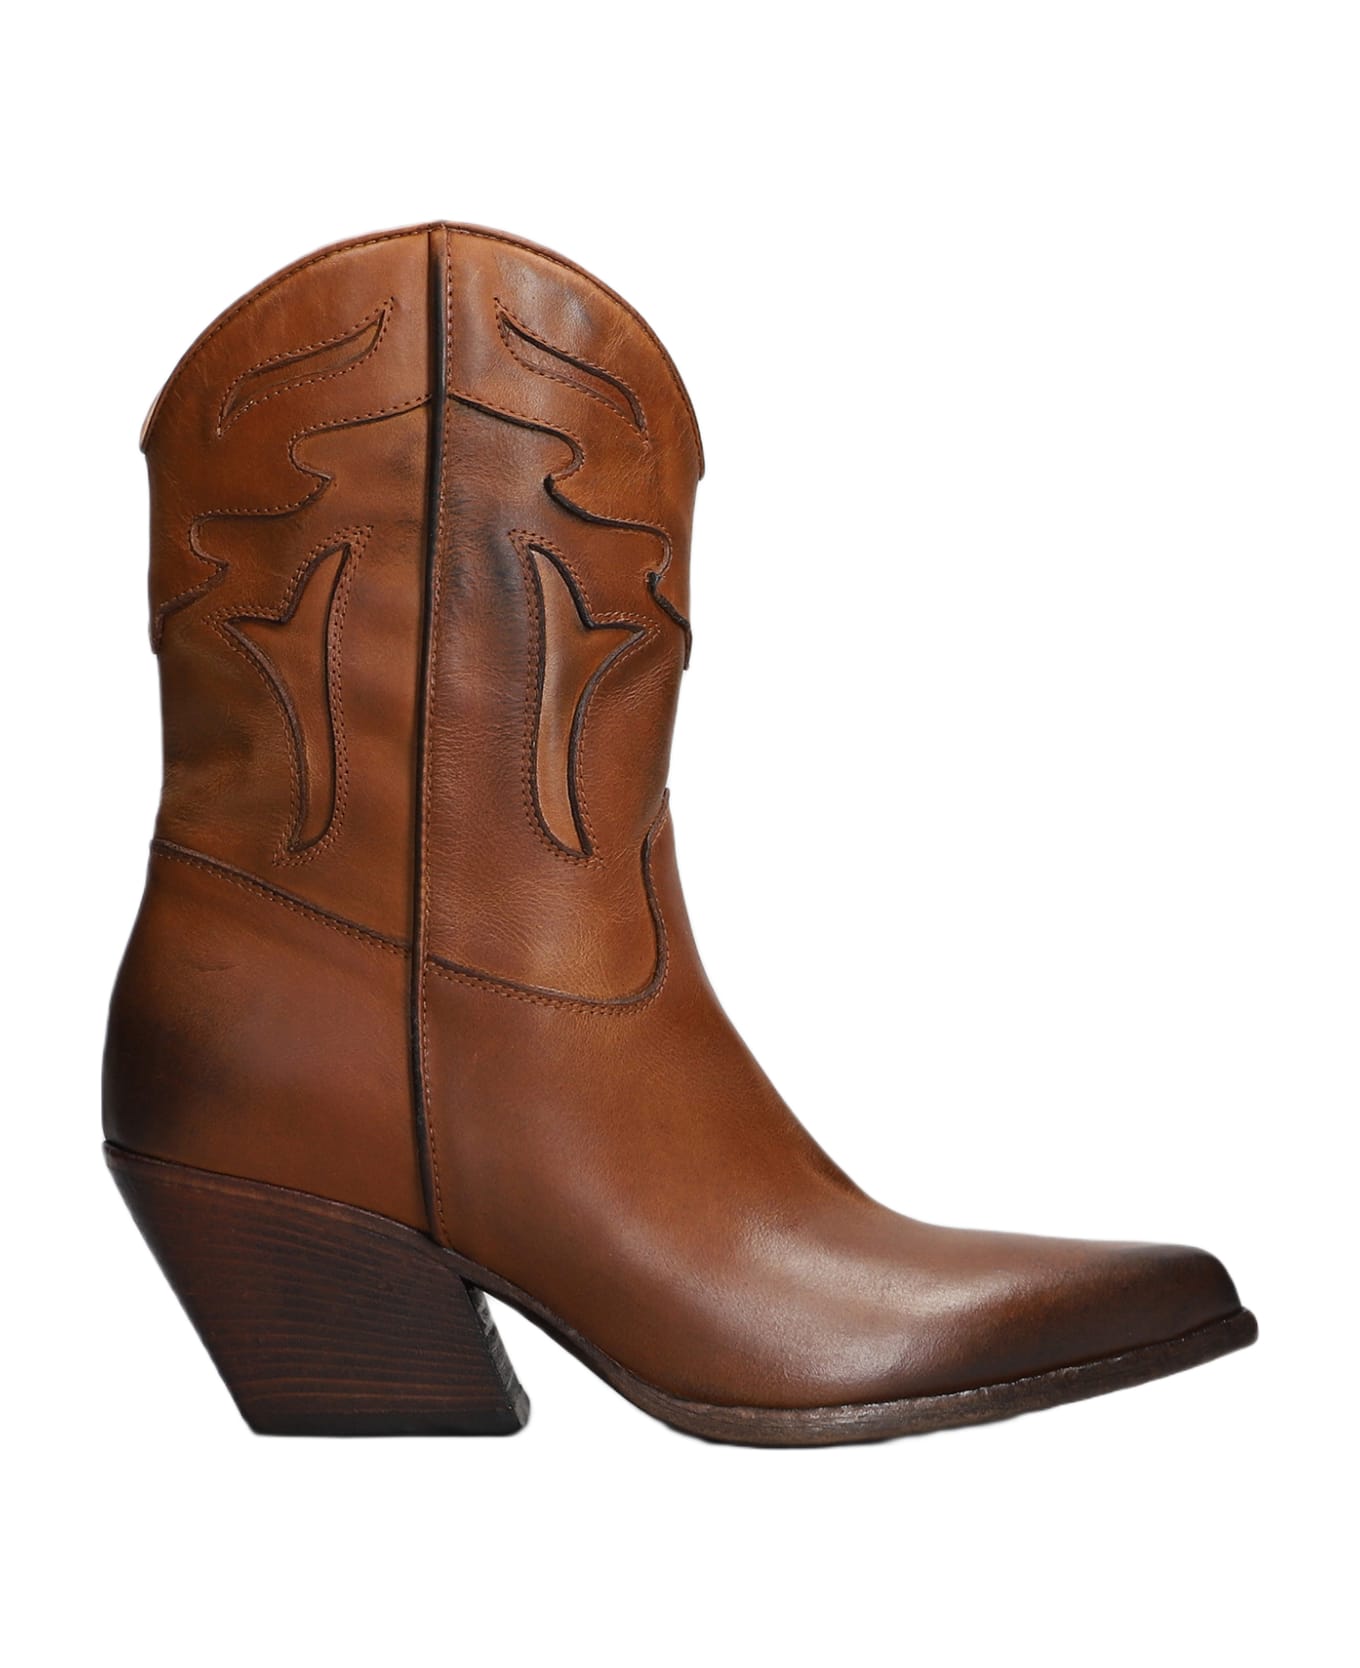 Elena Iachi Texan Ankle Boots In Leather Color Leather - leather color ブーツ